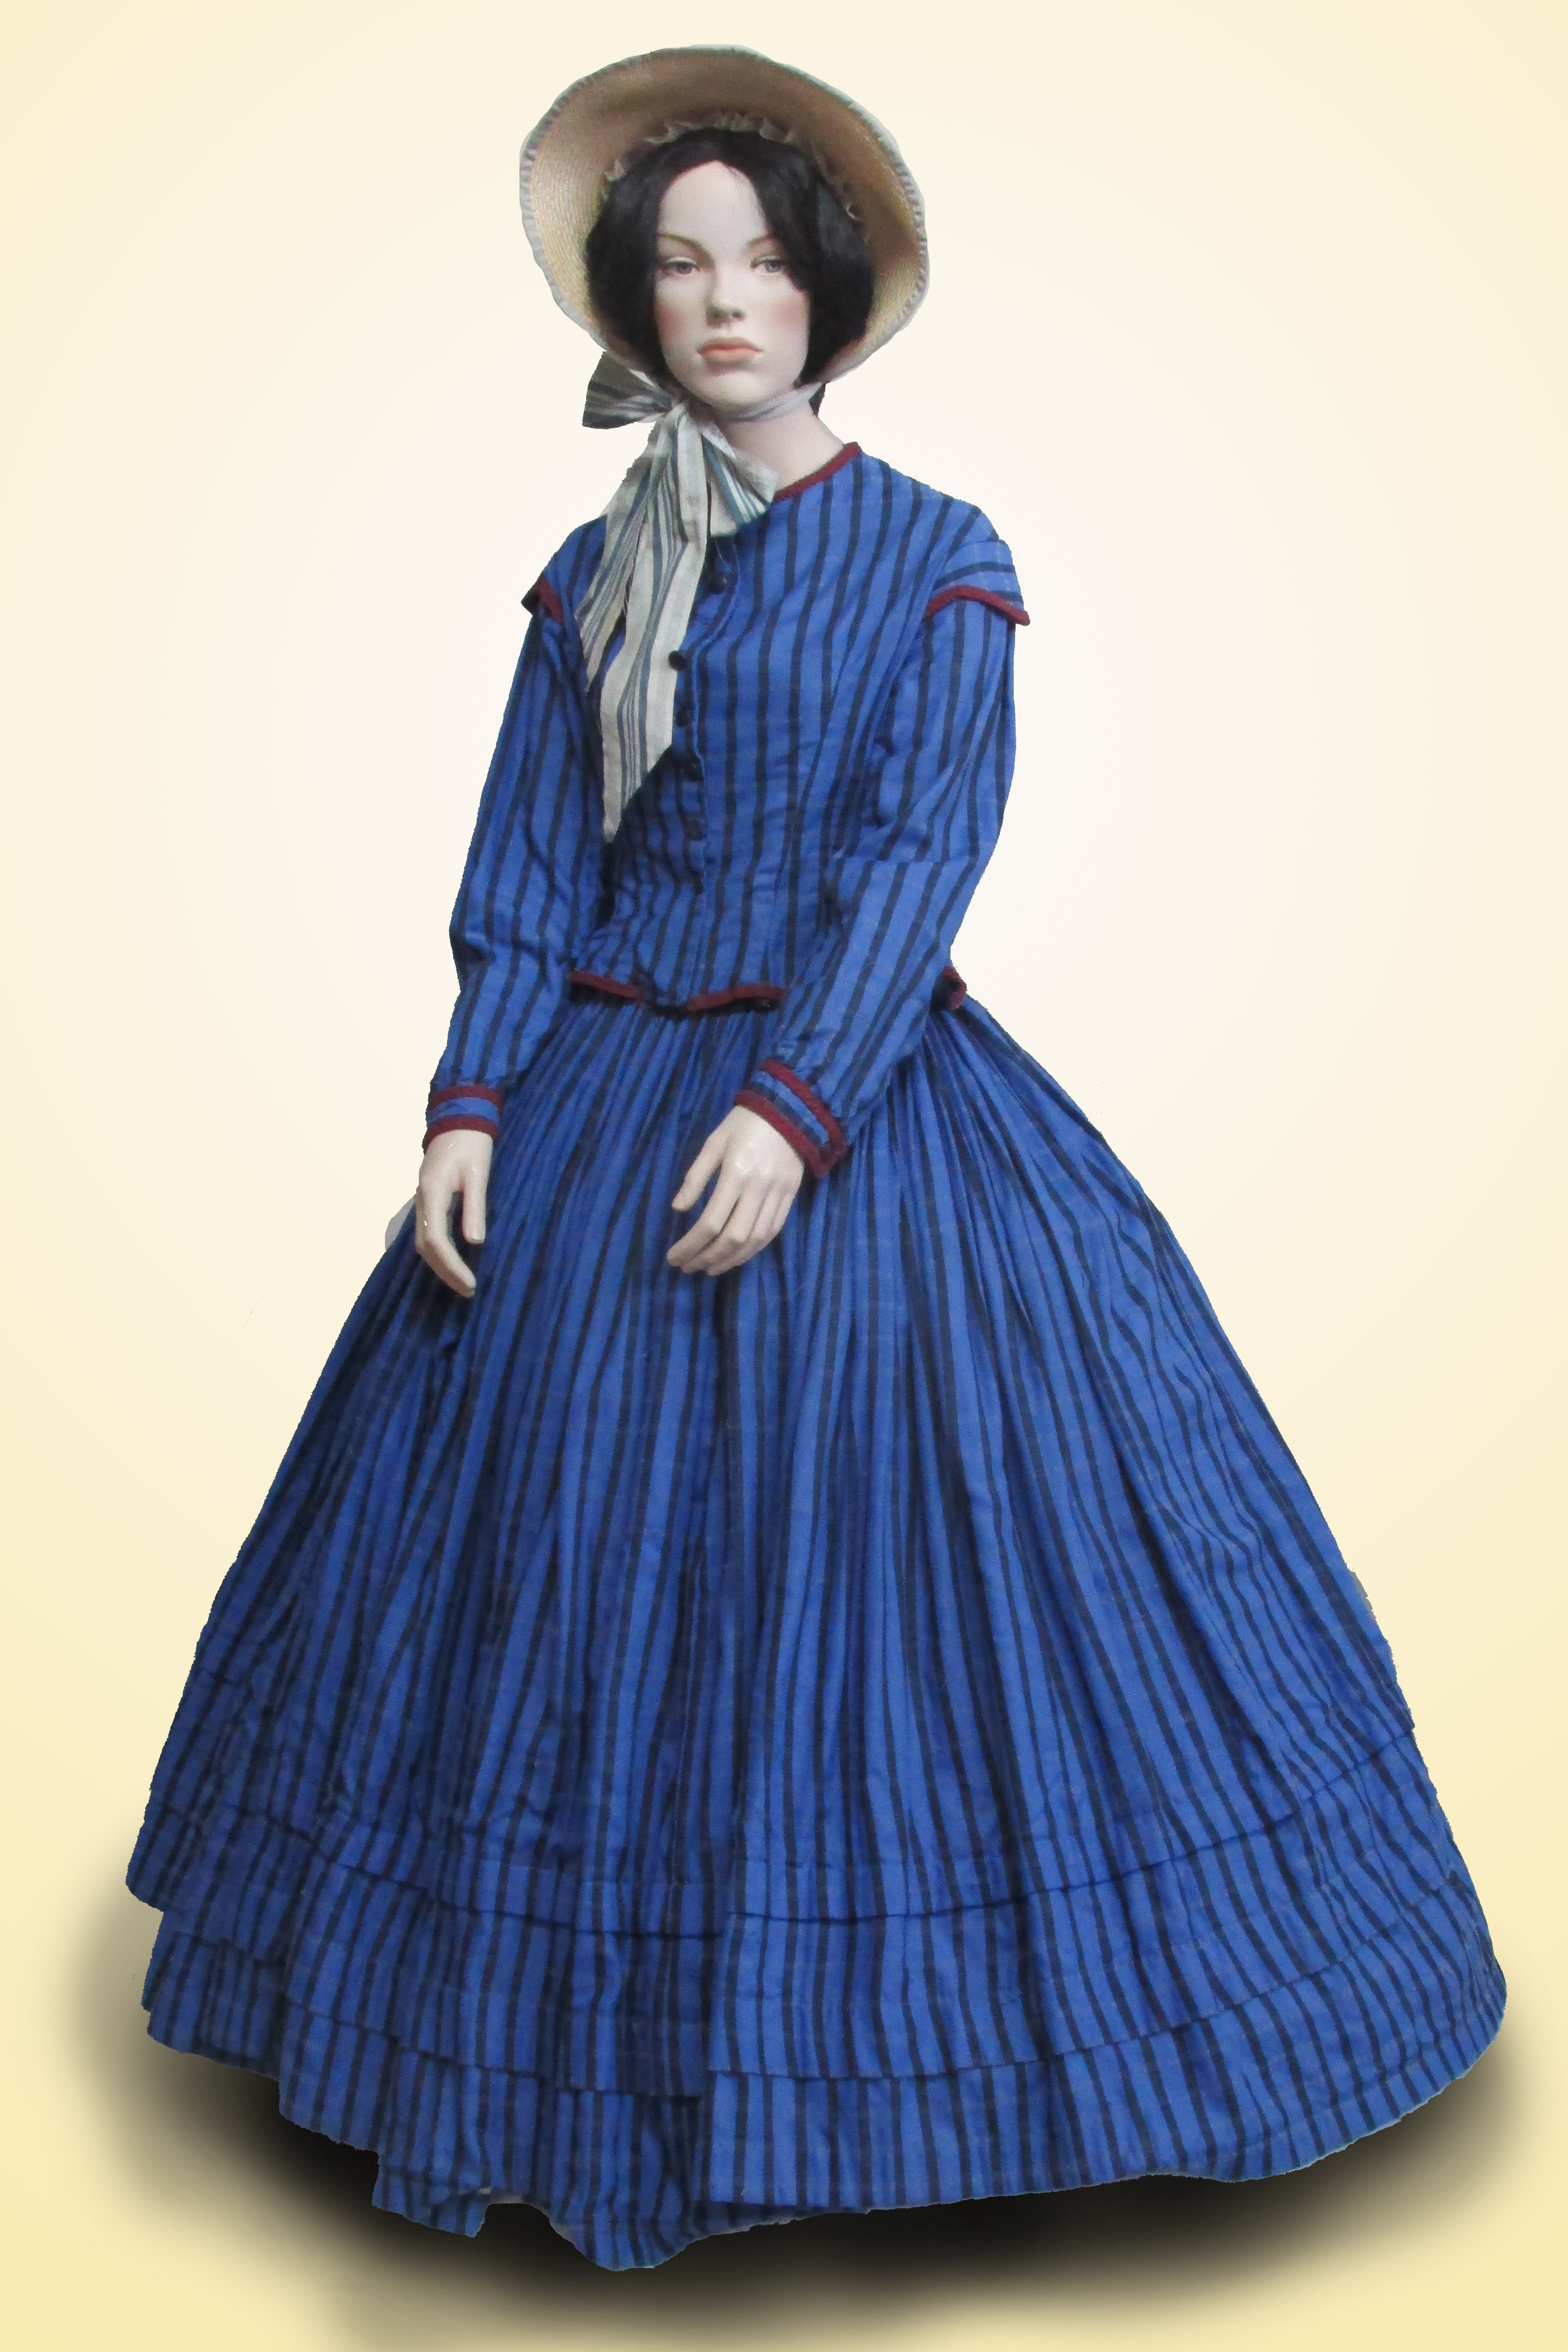 2 Piece Blue Check with Hoop with Straw Bonnet Mid 1800s